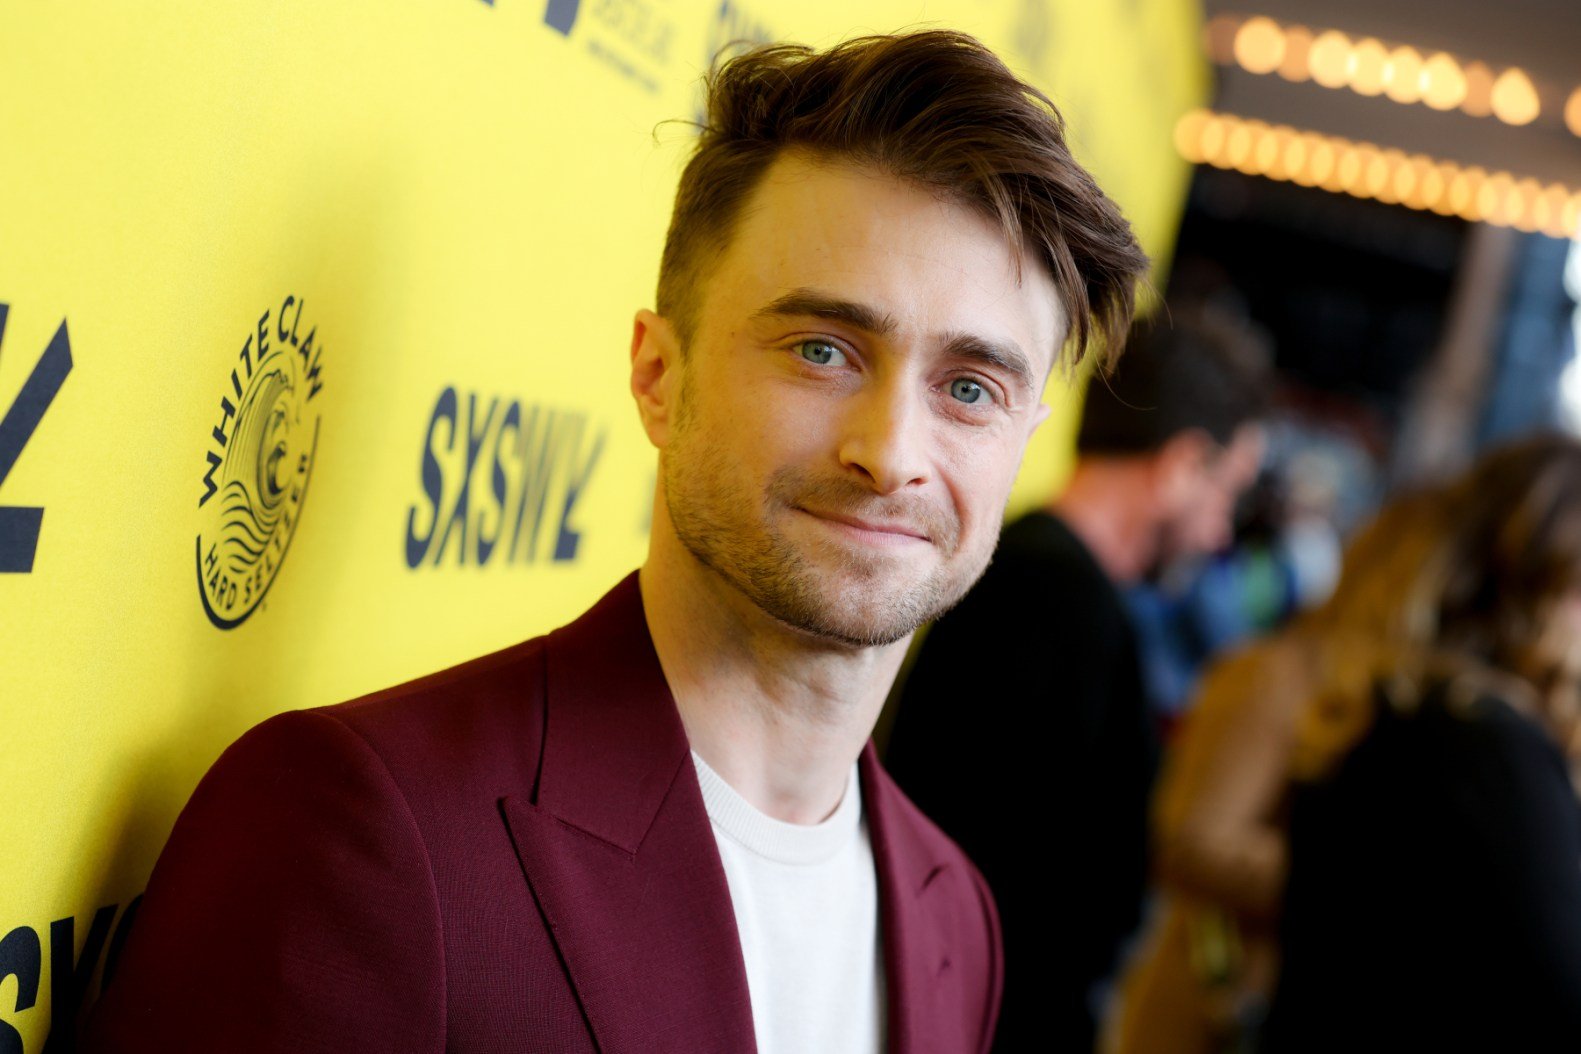 Daniel Radcliffe Reiterates His Criticism of J.K. Rowling's Transphobic Remarks